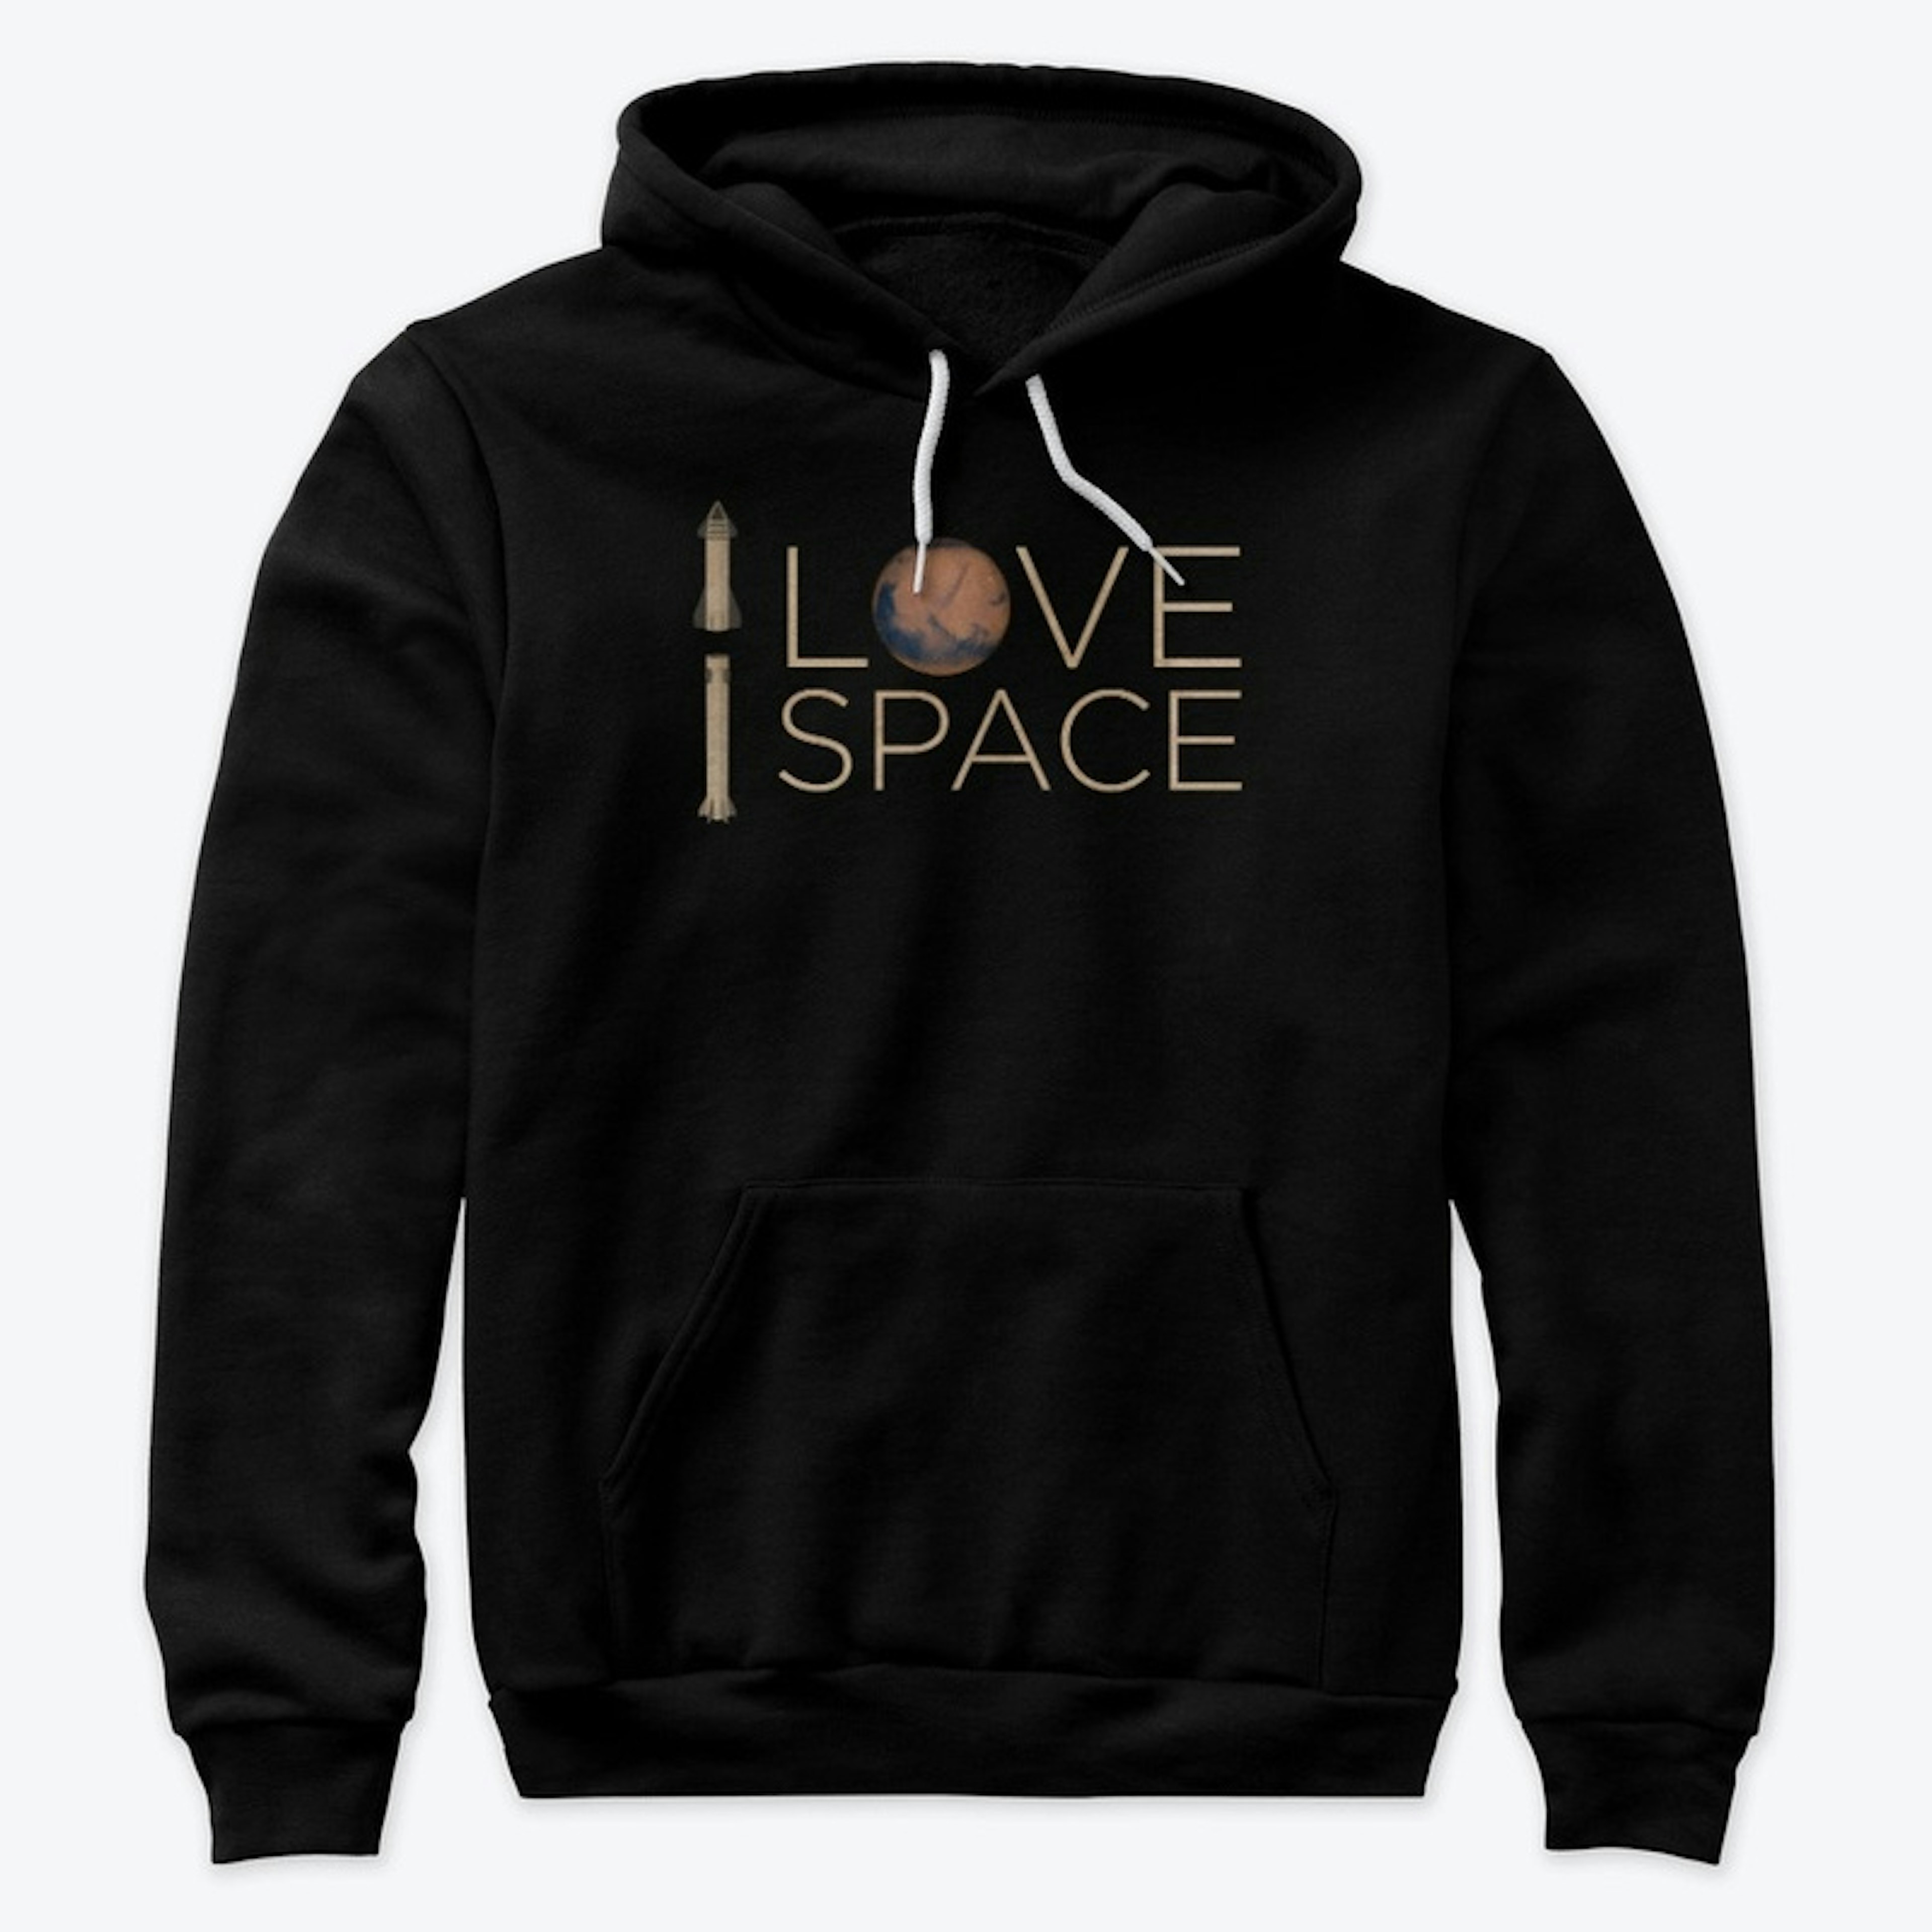 I Love Space (Gold SpaceX Starship)